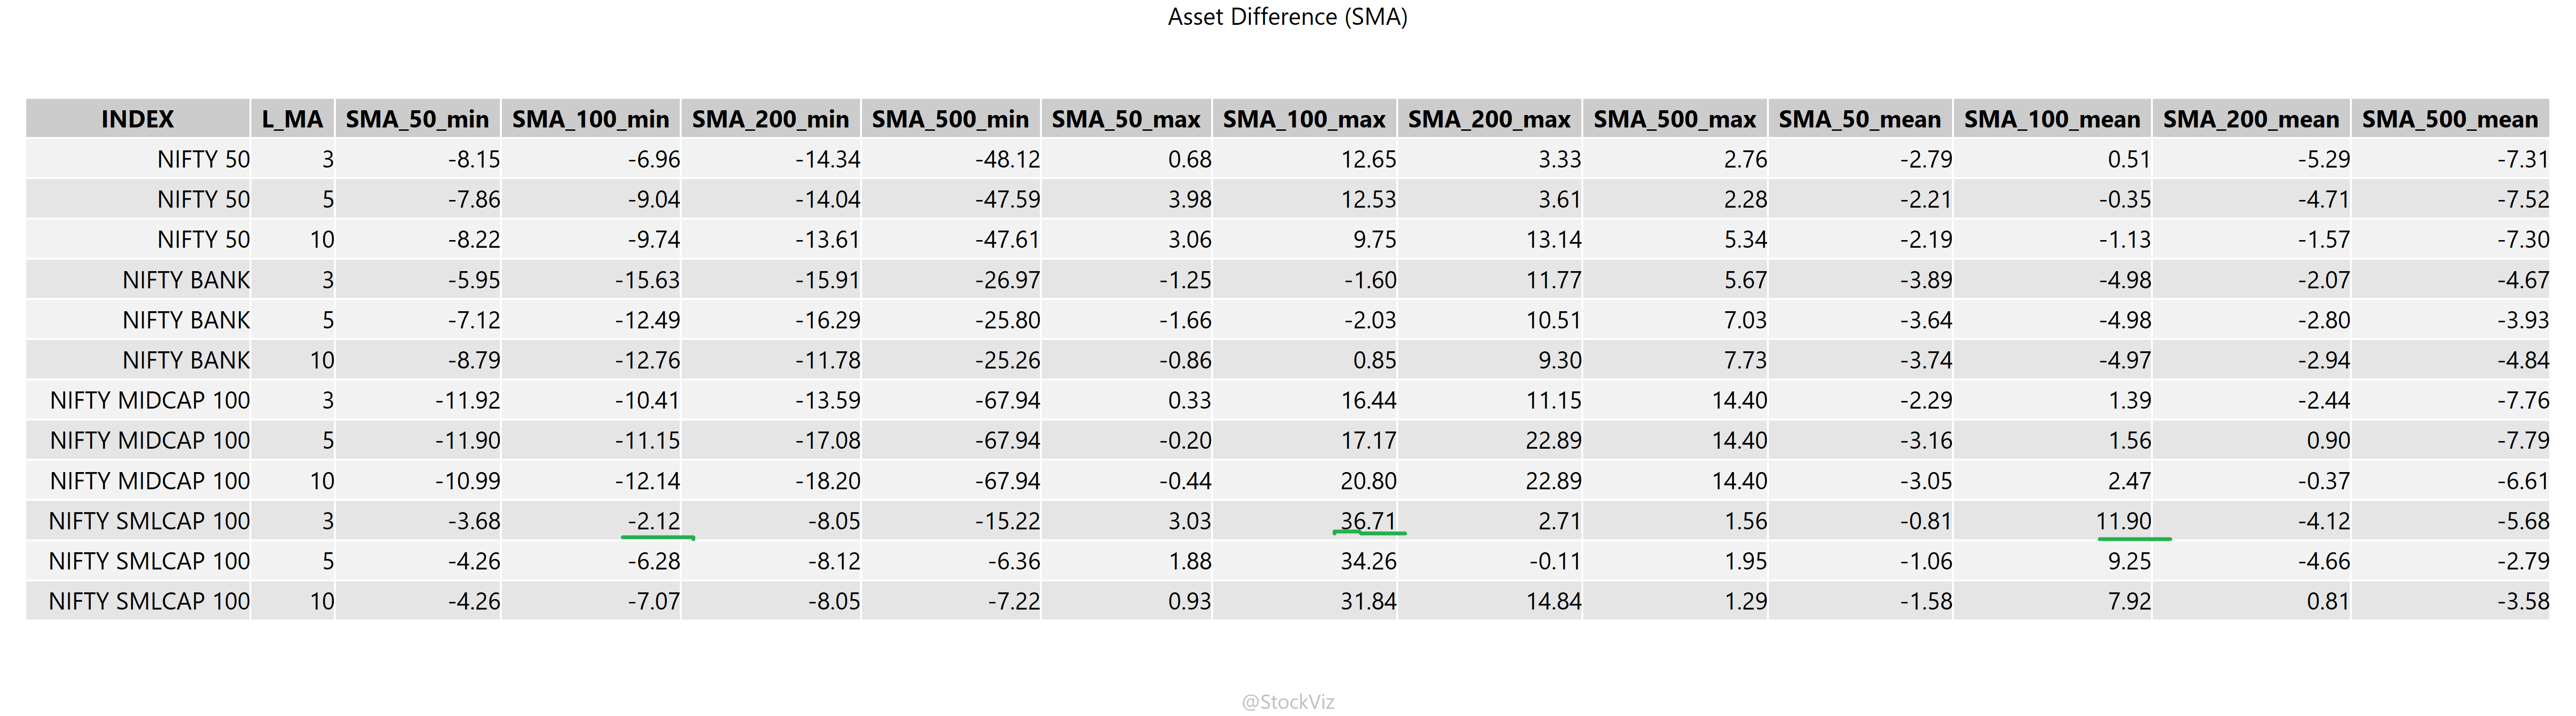 difference in assets accumulated